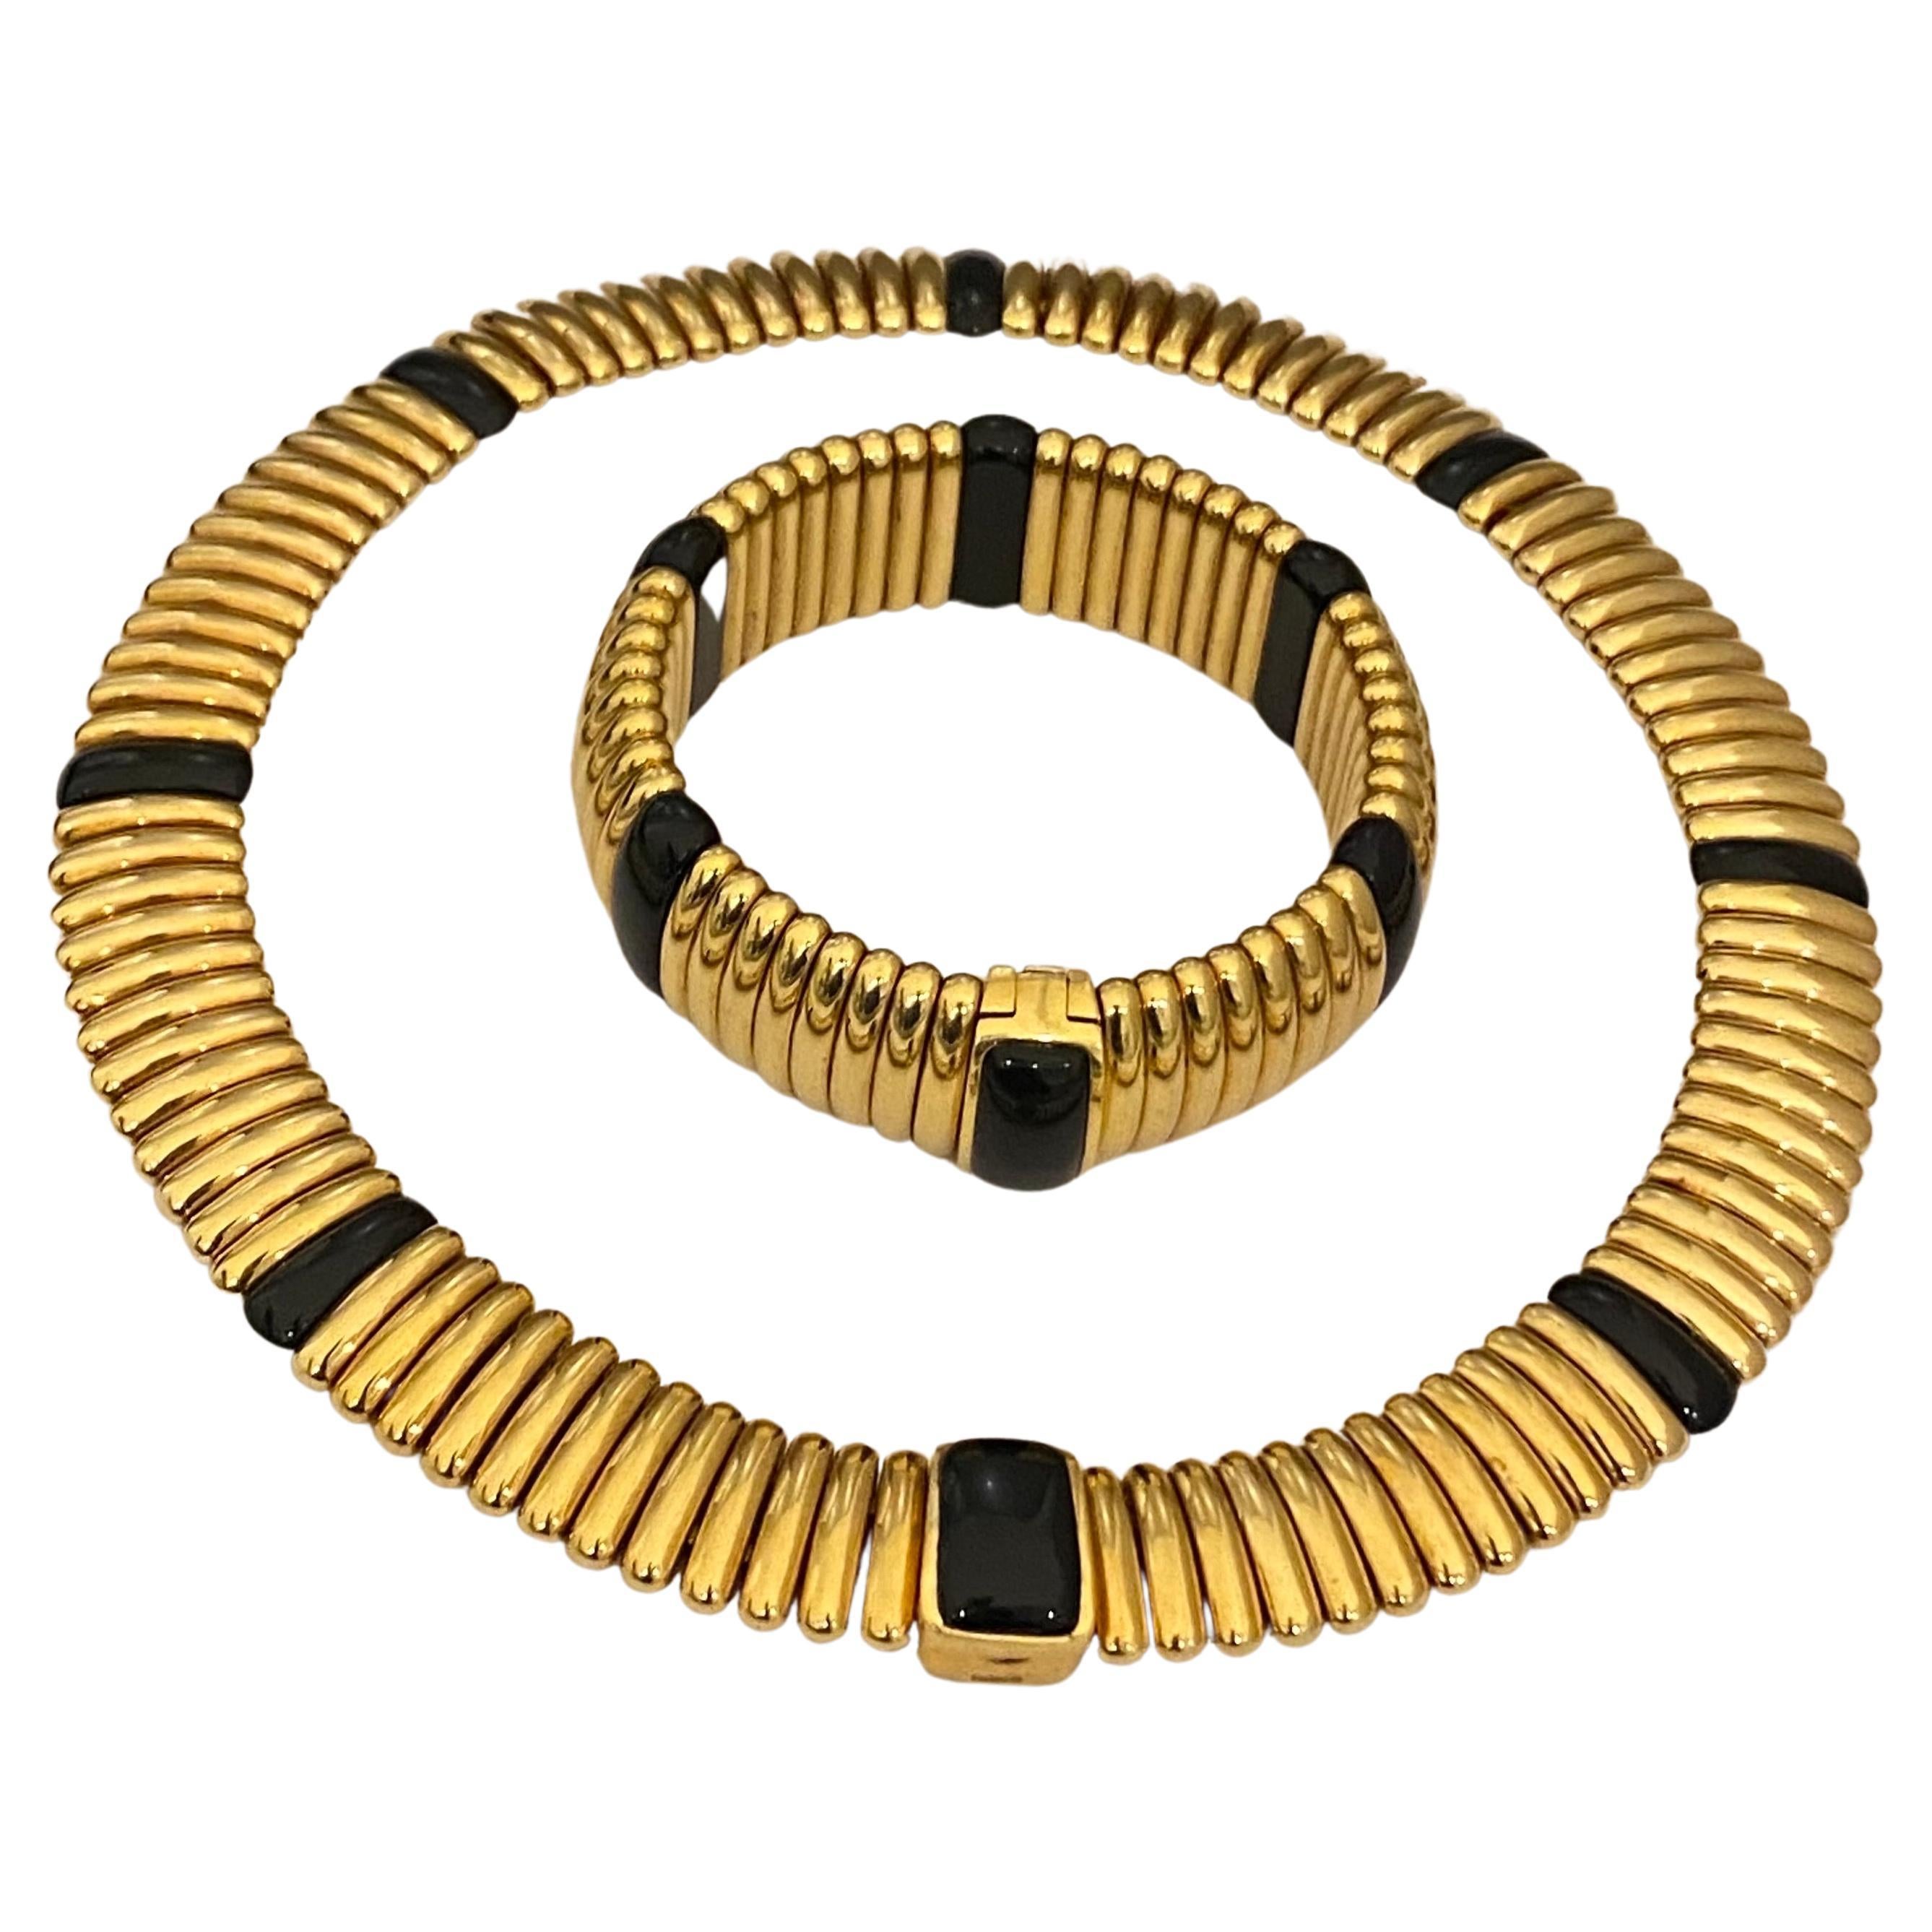 Kria Gioielli Italian 18K Yellow Gold and Onyx Necklace and Bracelet Set  For Sale at 1stDibs